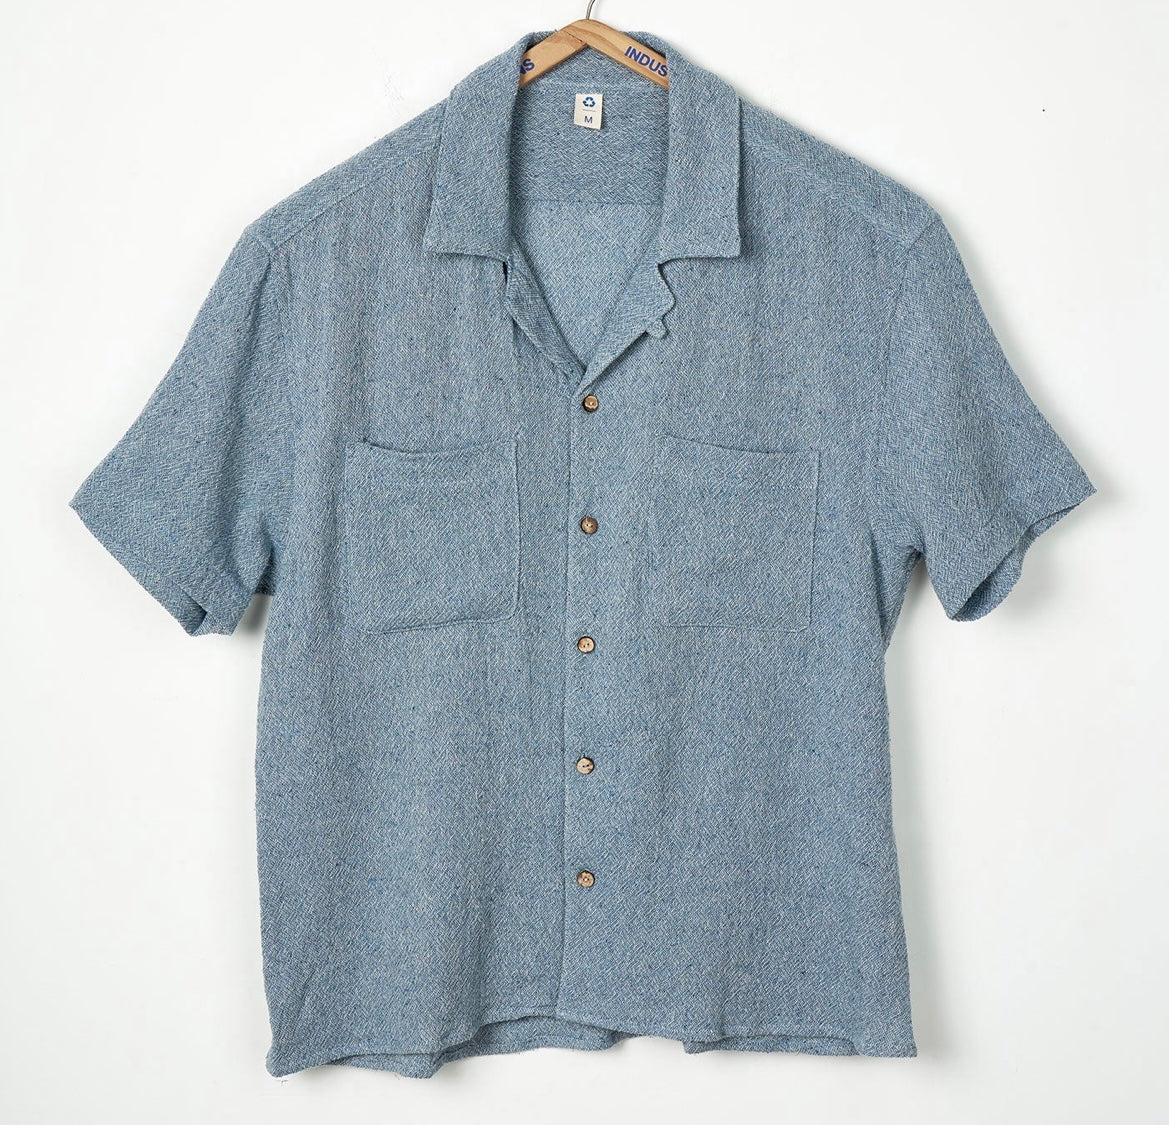 Industry of All Nations - INDUSTRY OF ALL NATIONS NEW CAMP SHIRT IN DENIM - Rent With Thred